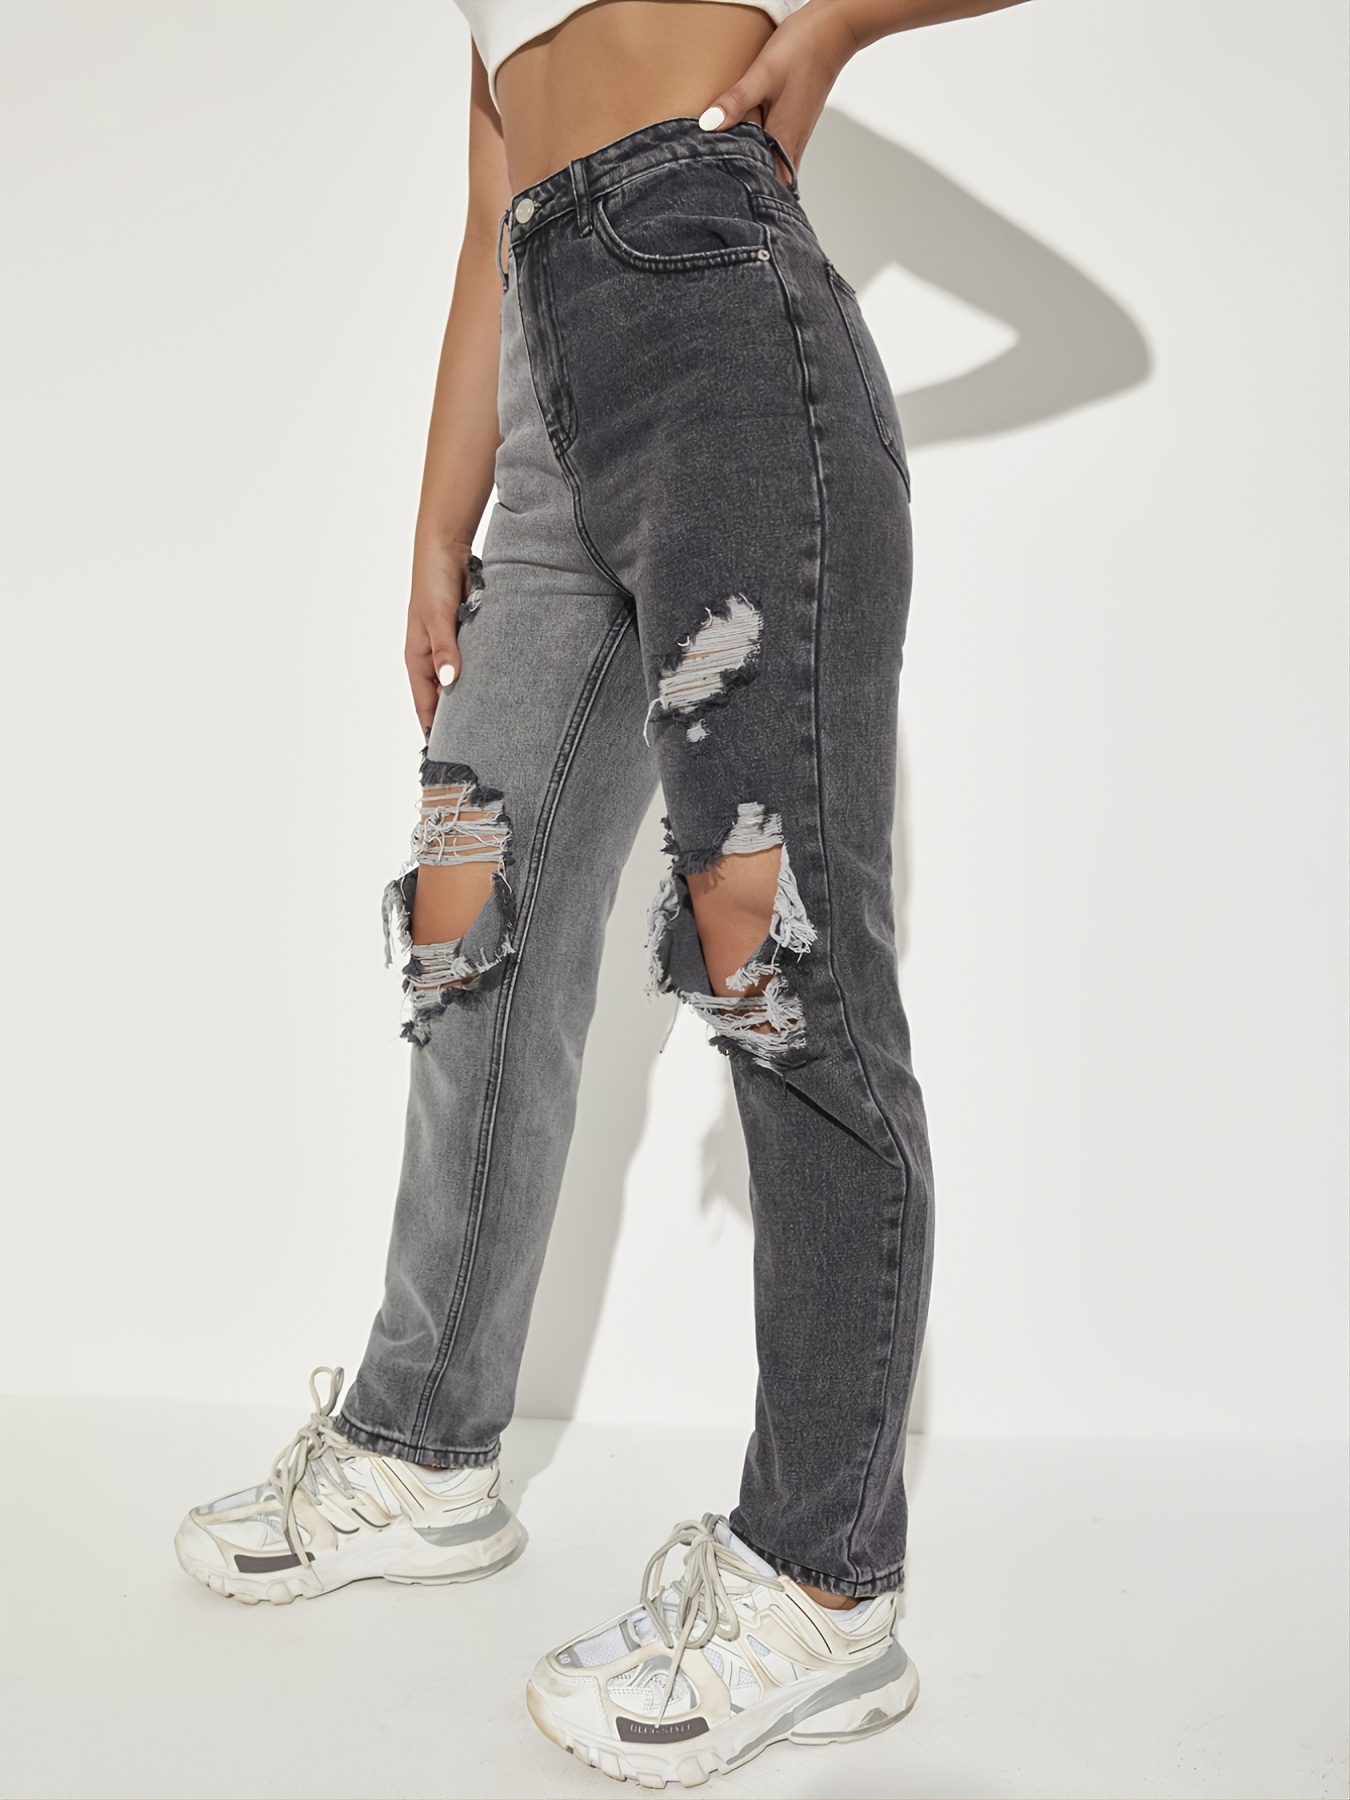 Two Tone Knee Ripped Denim Pants, Distressed High Rise Jeans